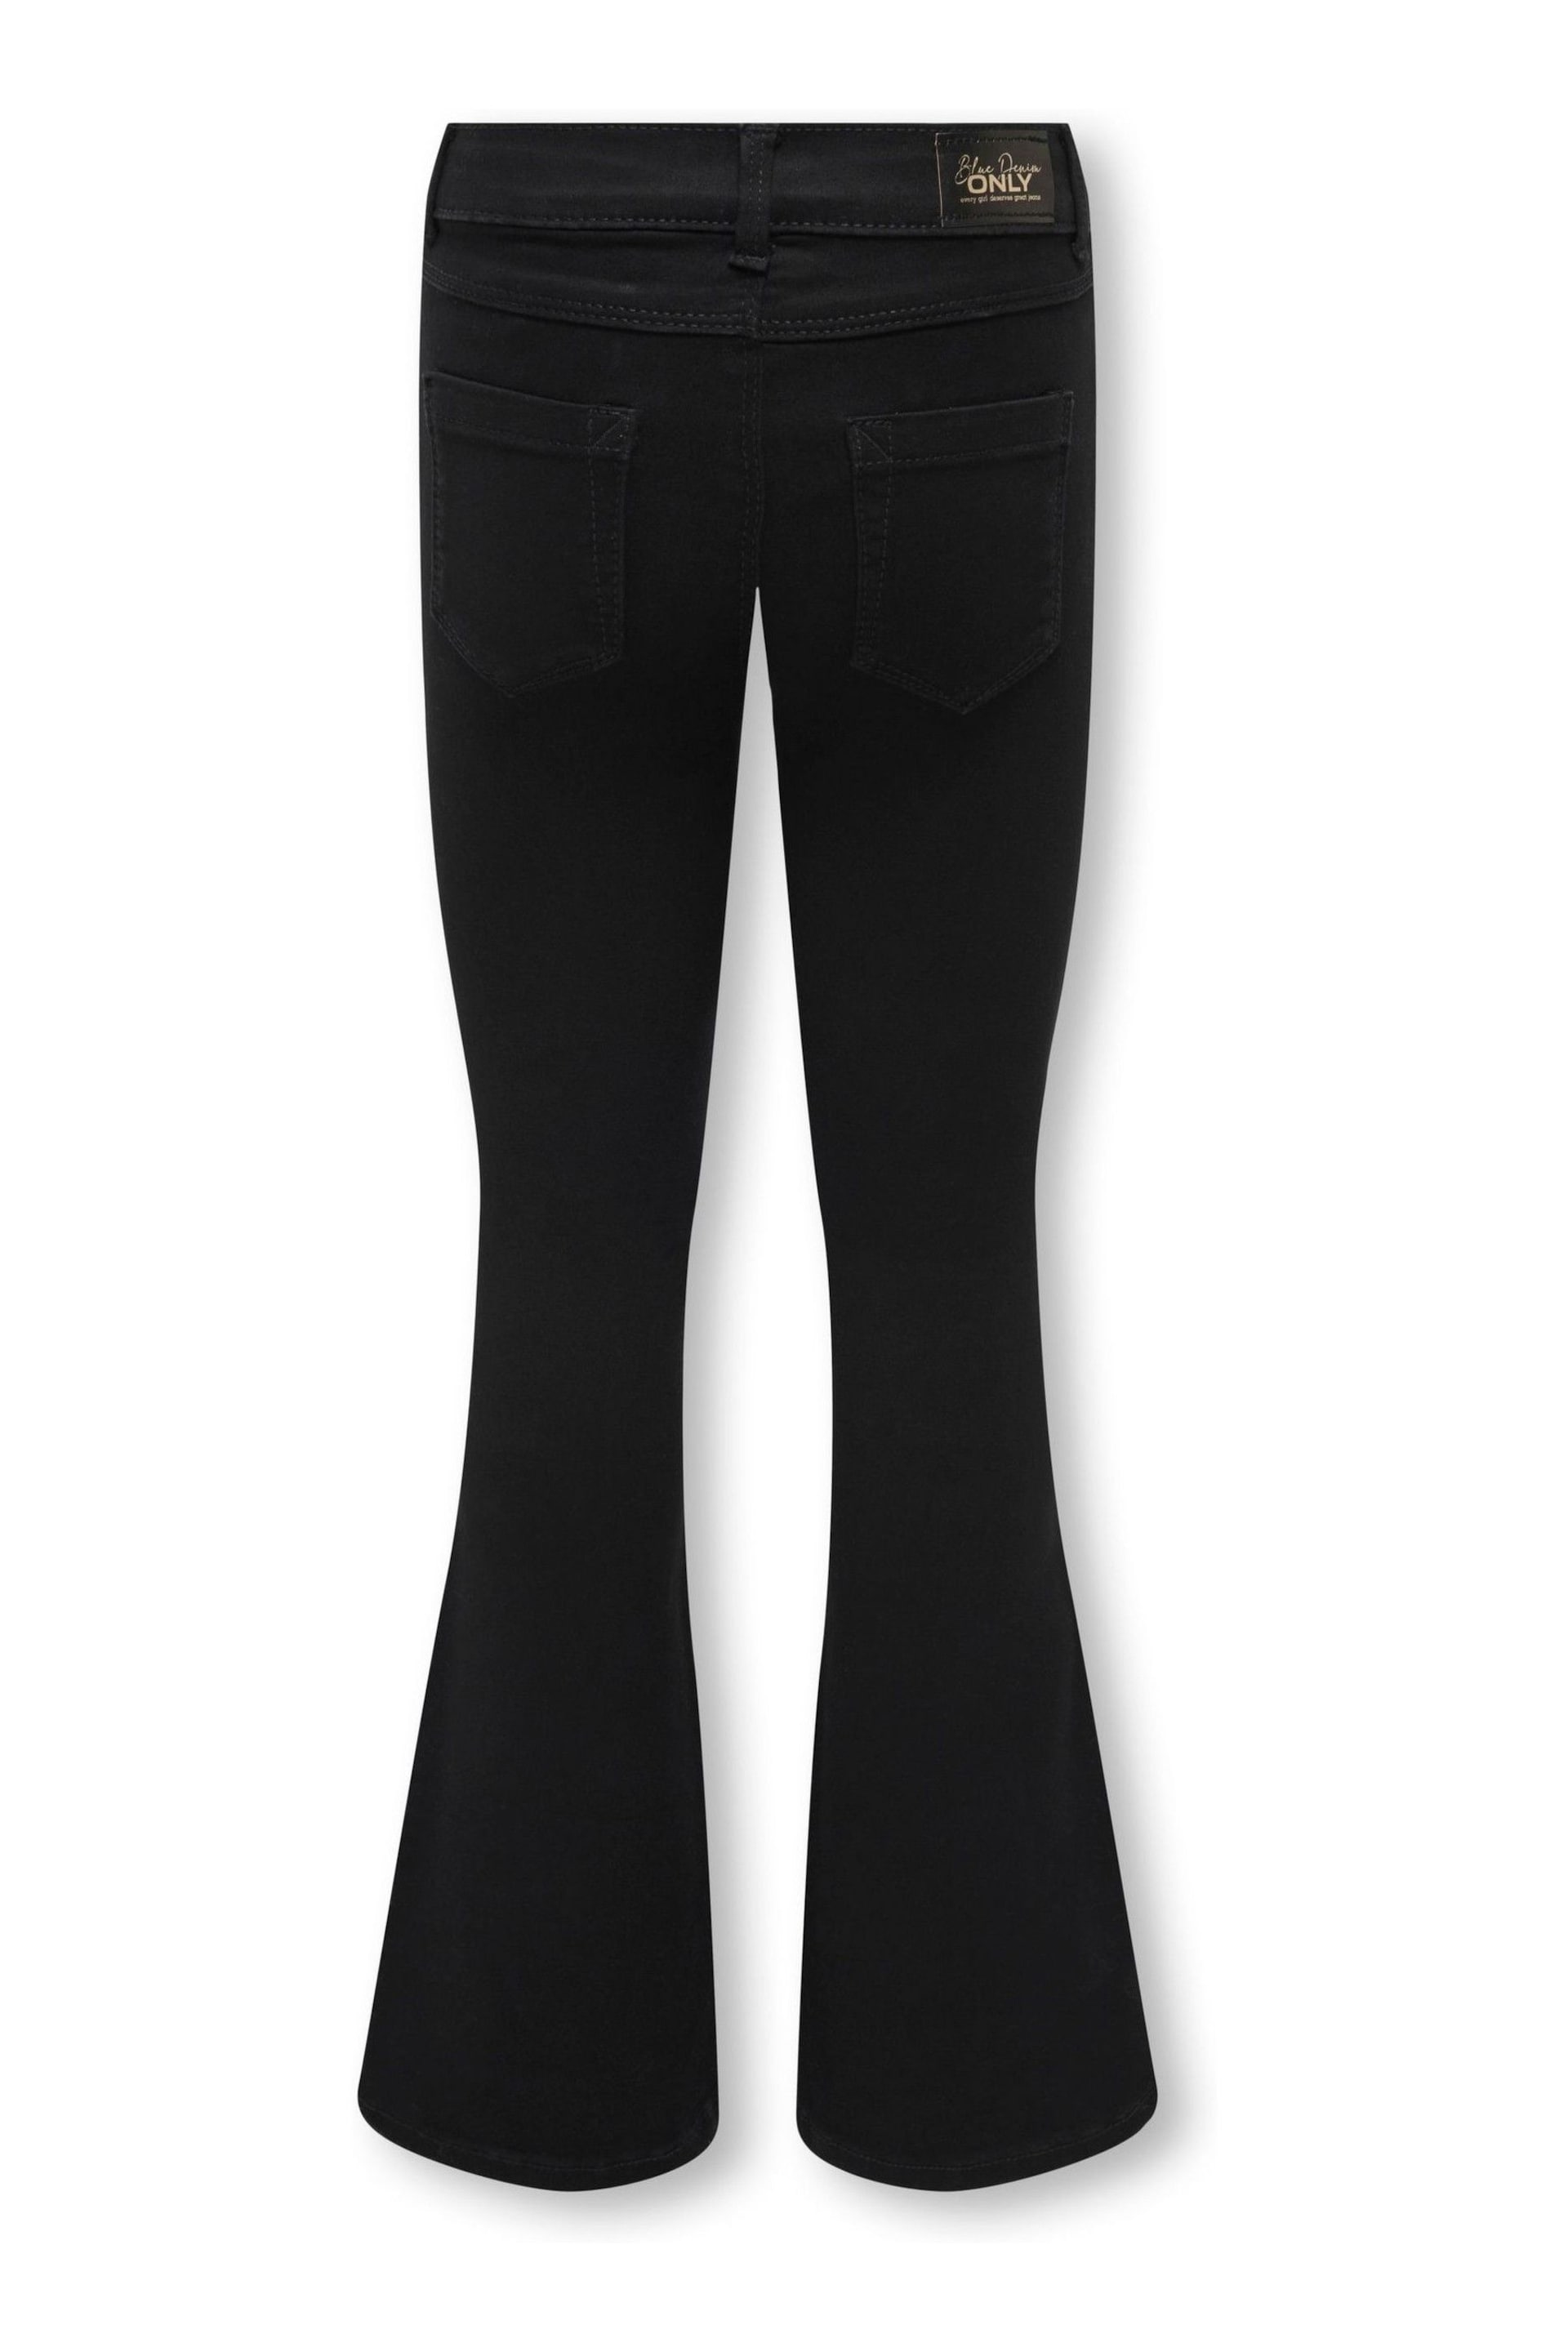 ONLY KIDS Flare Leg Jeans With Adjustable Waist - Image 3 of 4